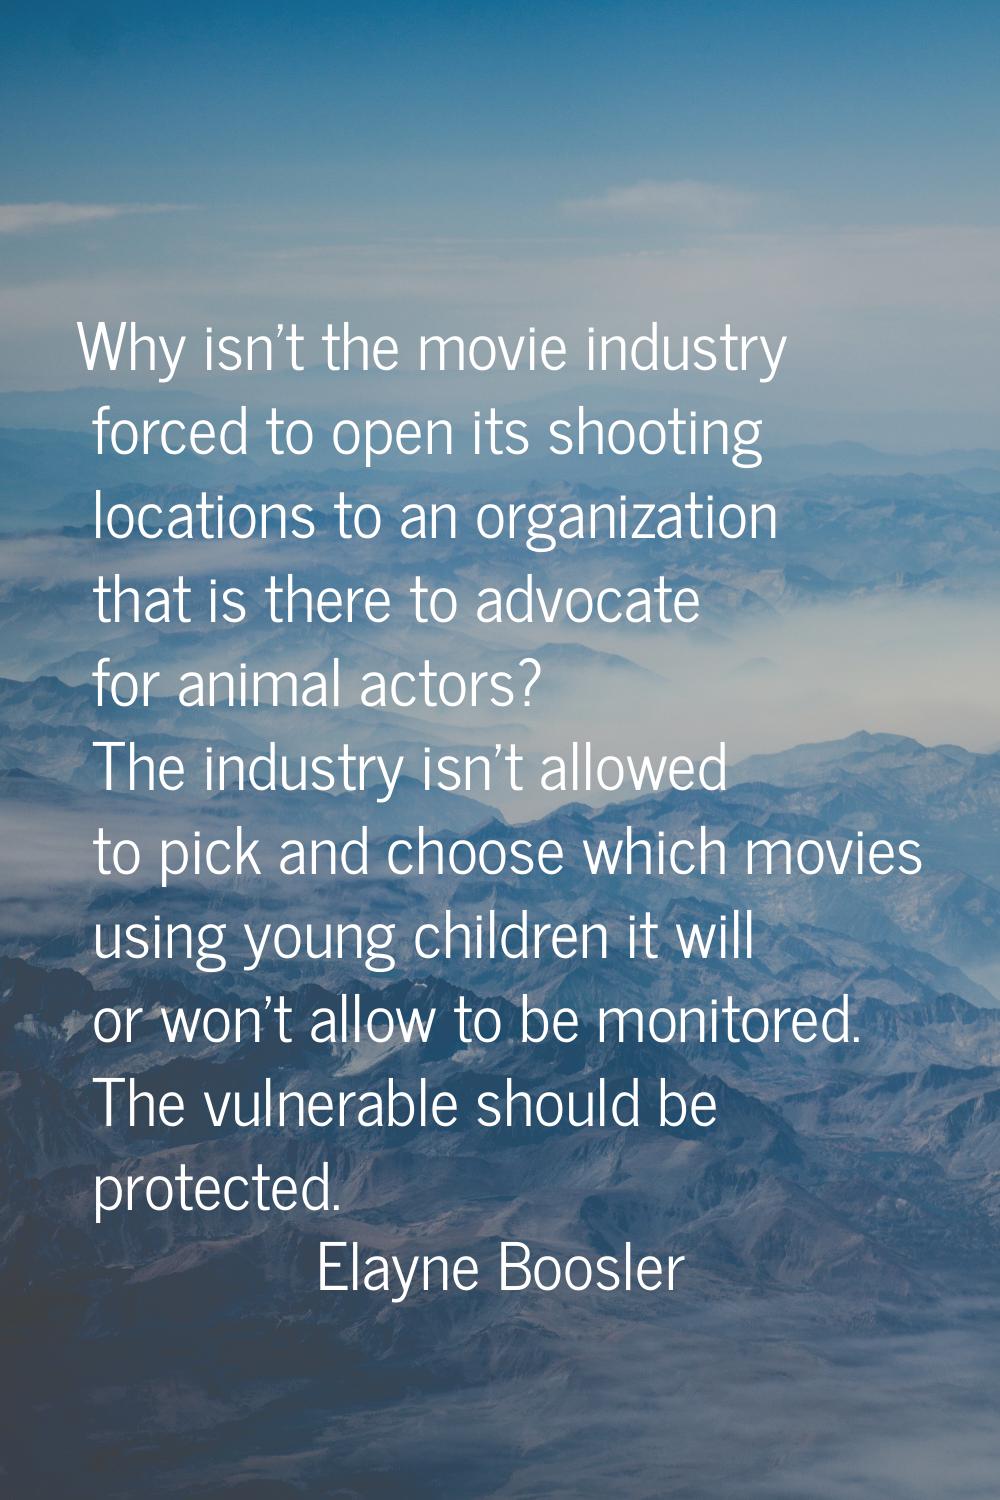 Why isn't the movie industry forced to open its shooting locations to an organization that is there